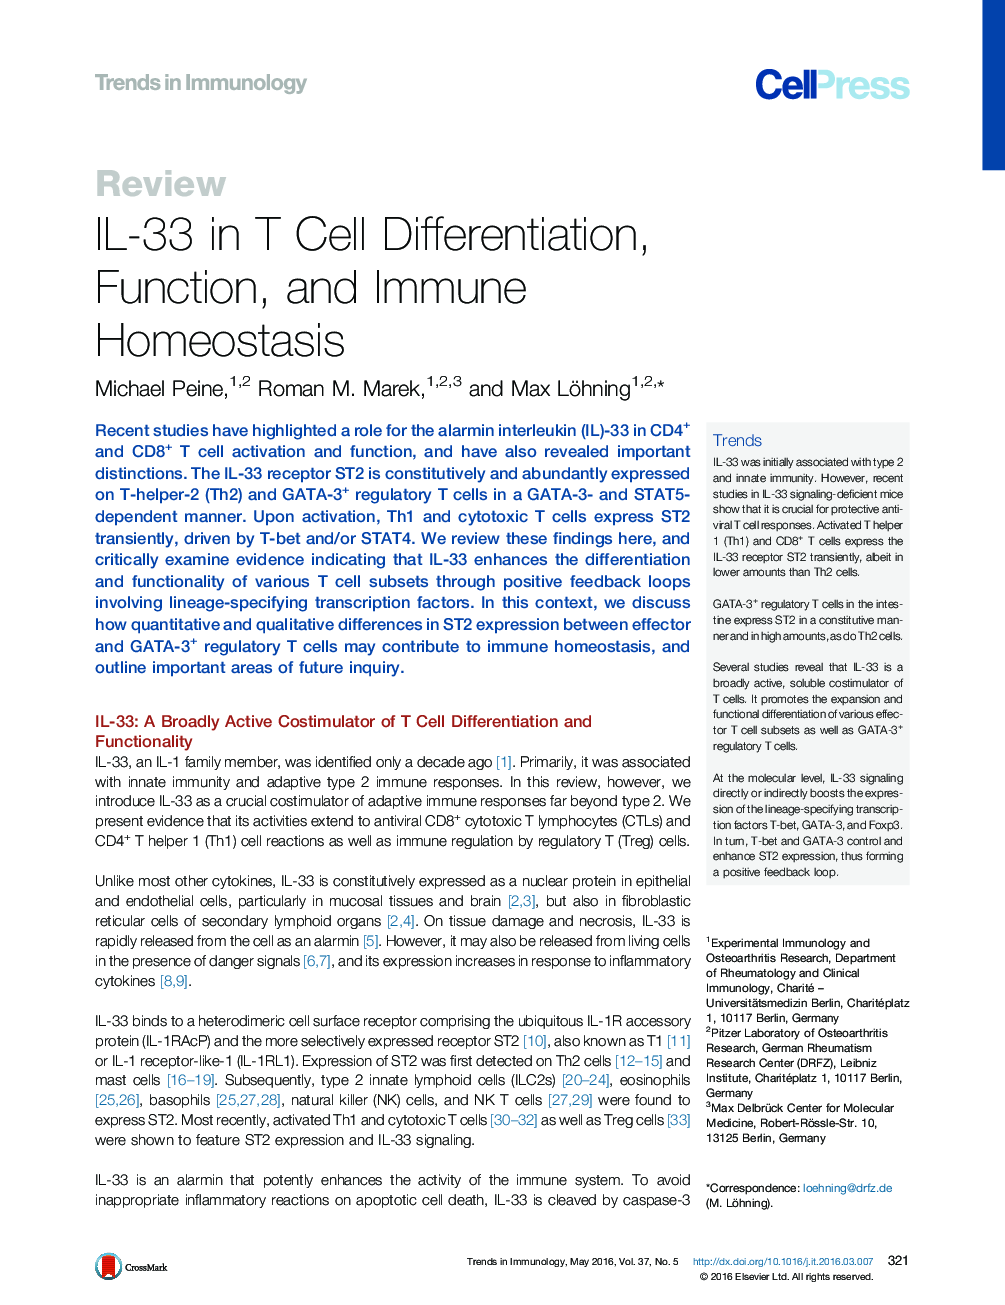 IL-33 in T Cell Differentiation, Function, and Immune Homeostasis